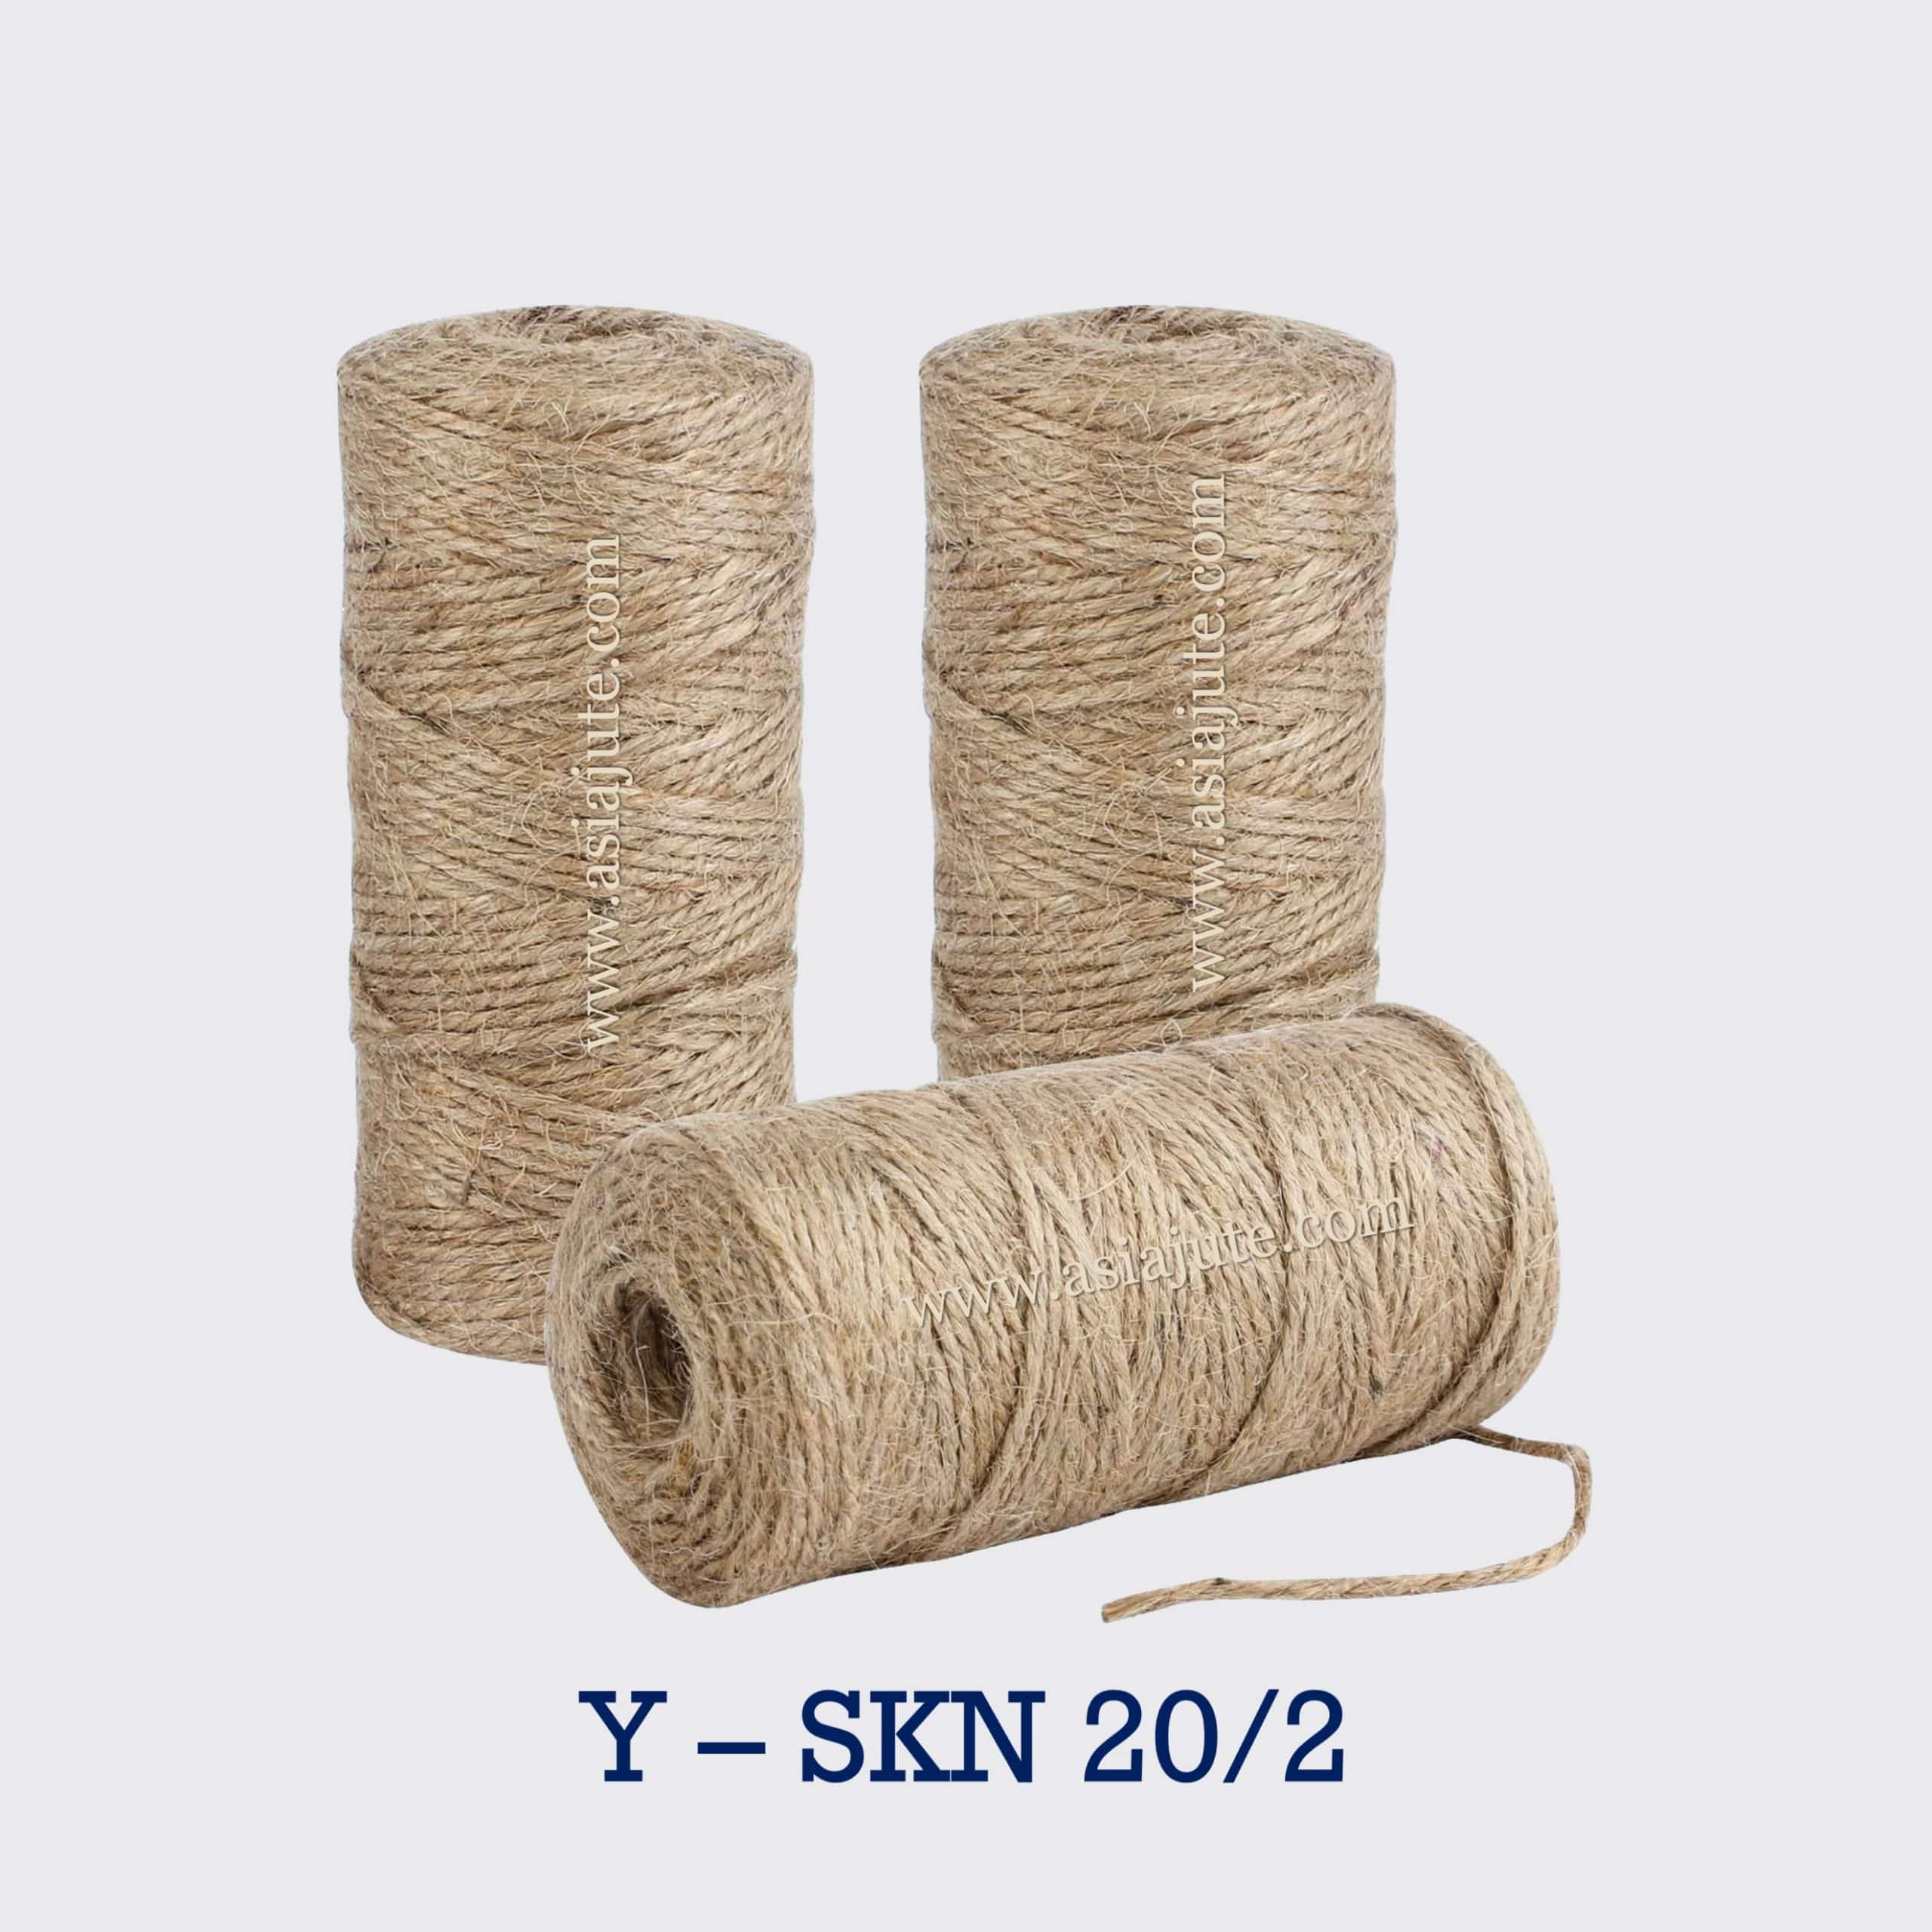 China Factory Jute Cord, Jute String, Jute Twine, 5 Ply, for